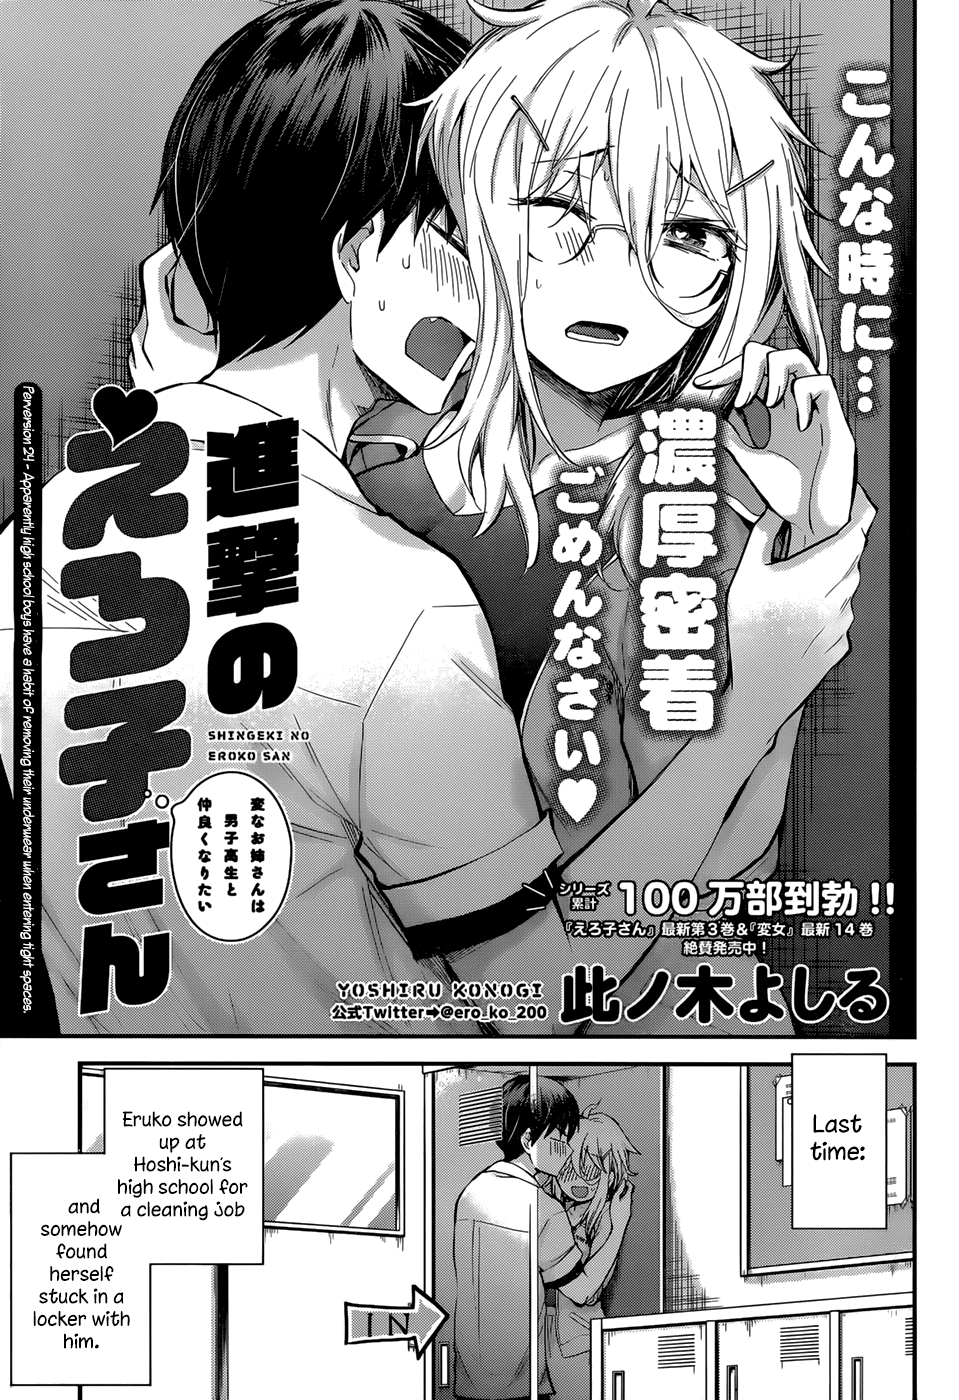 Shingeki No Eroko-San Chapter 24: Perversion 24: Apparently High School Boys Have A Habit Of Removing Their Underwear When Entering Tight Spaces. - Picture 1